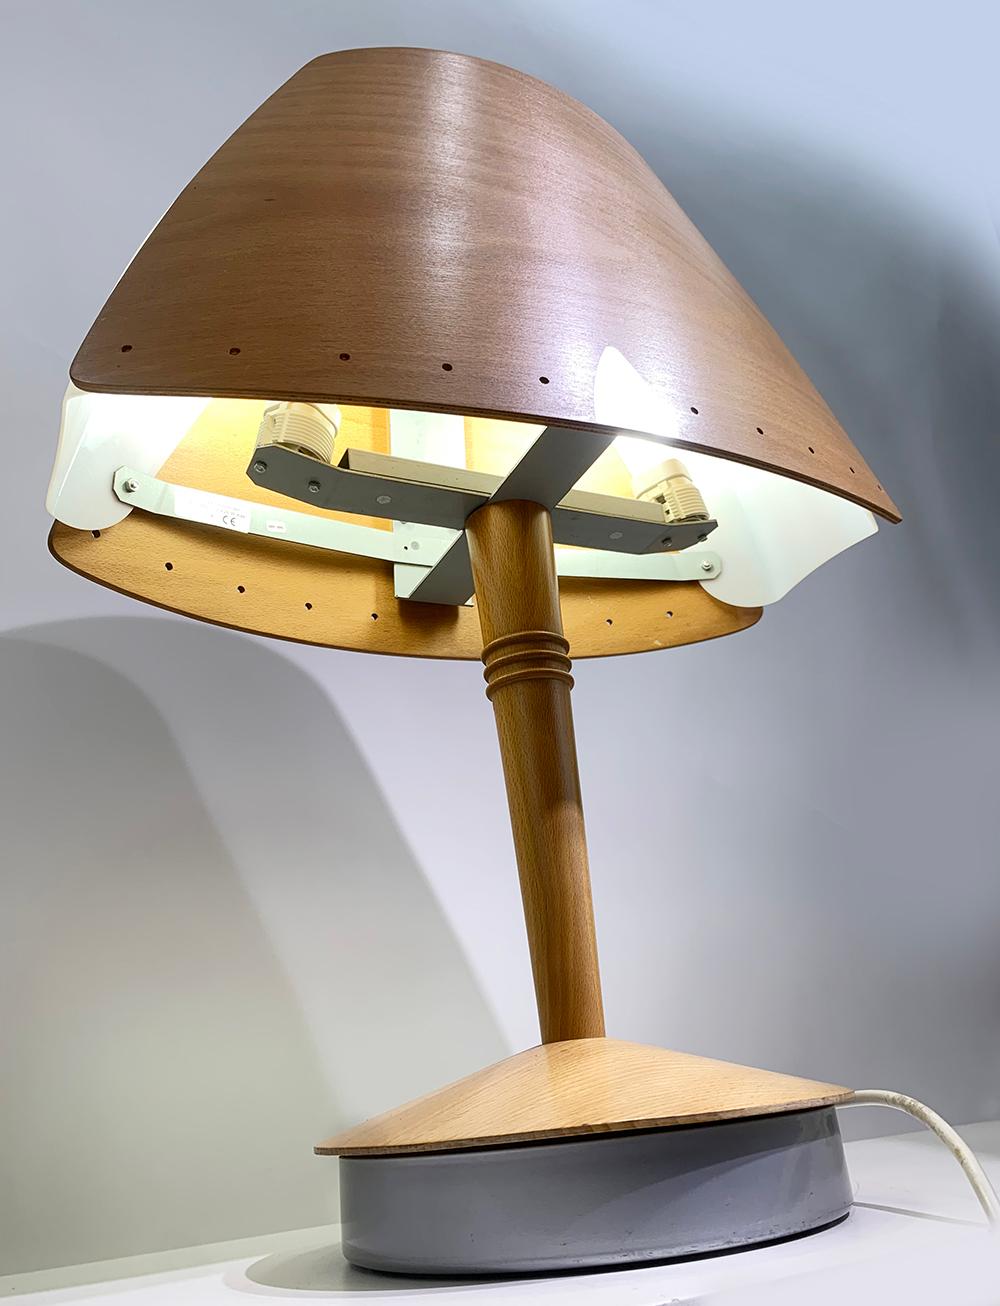 20th Century Midcentury French Design Wooden Table Lamp by Lucid, 1970s For Sale